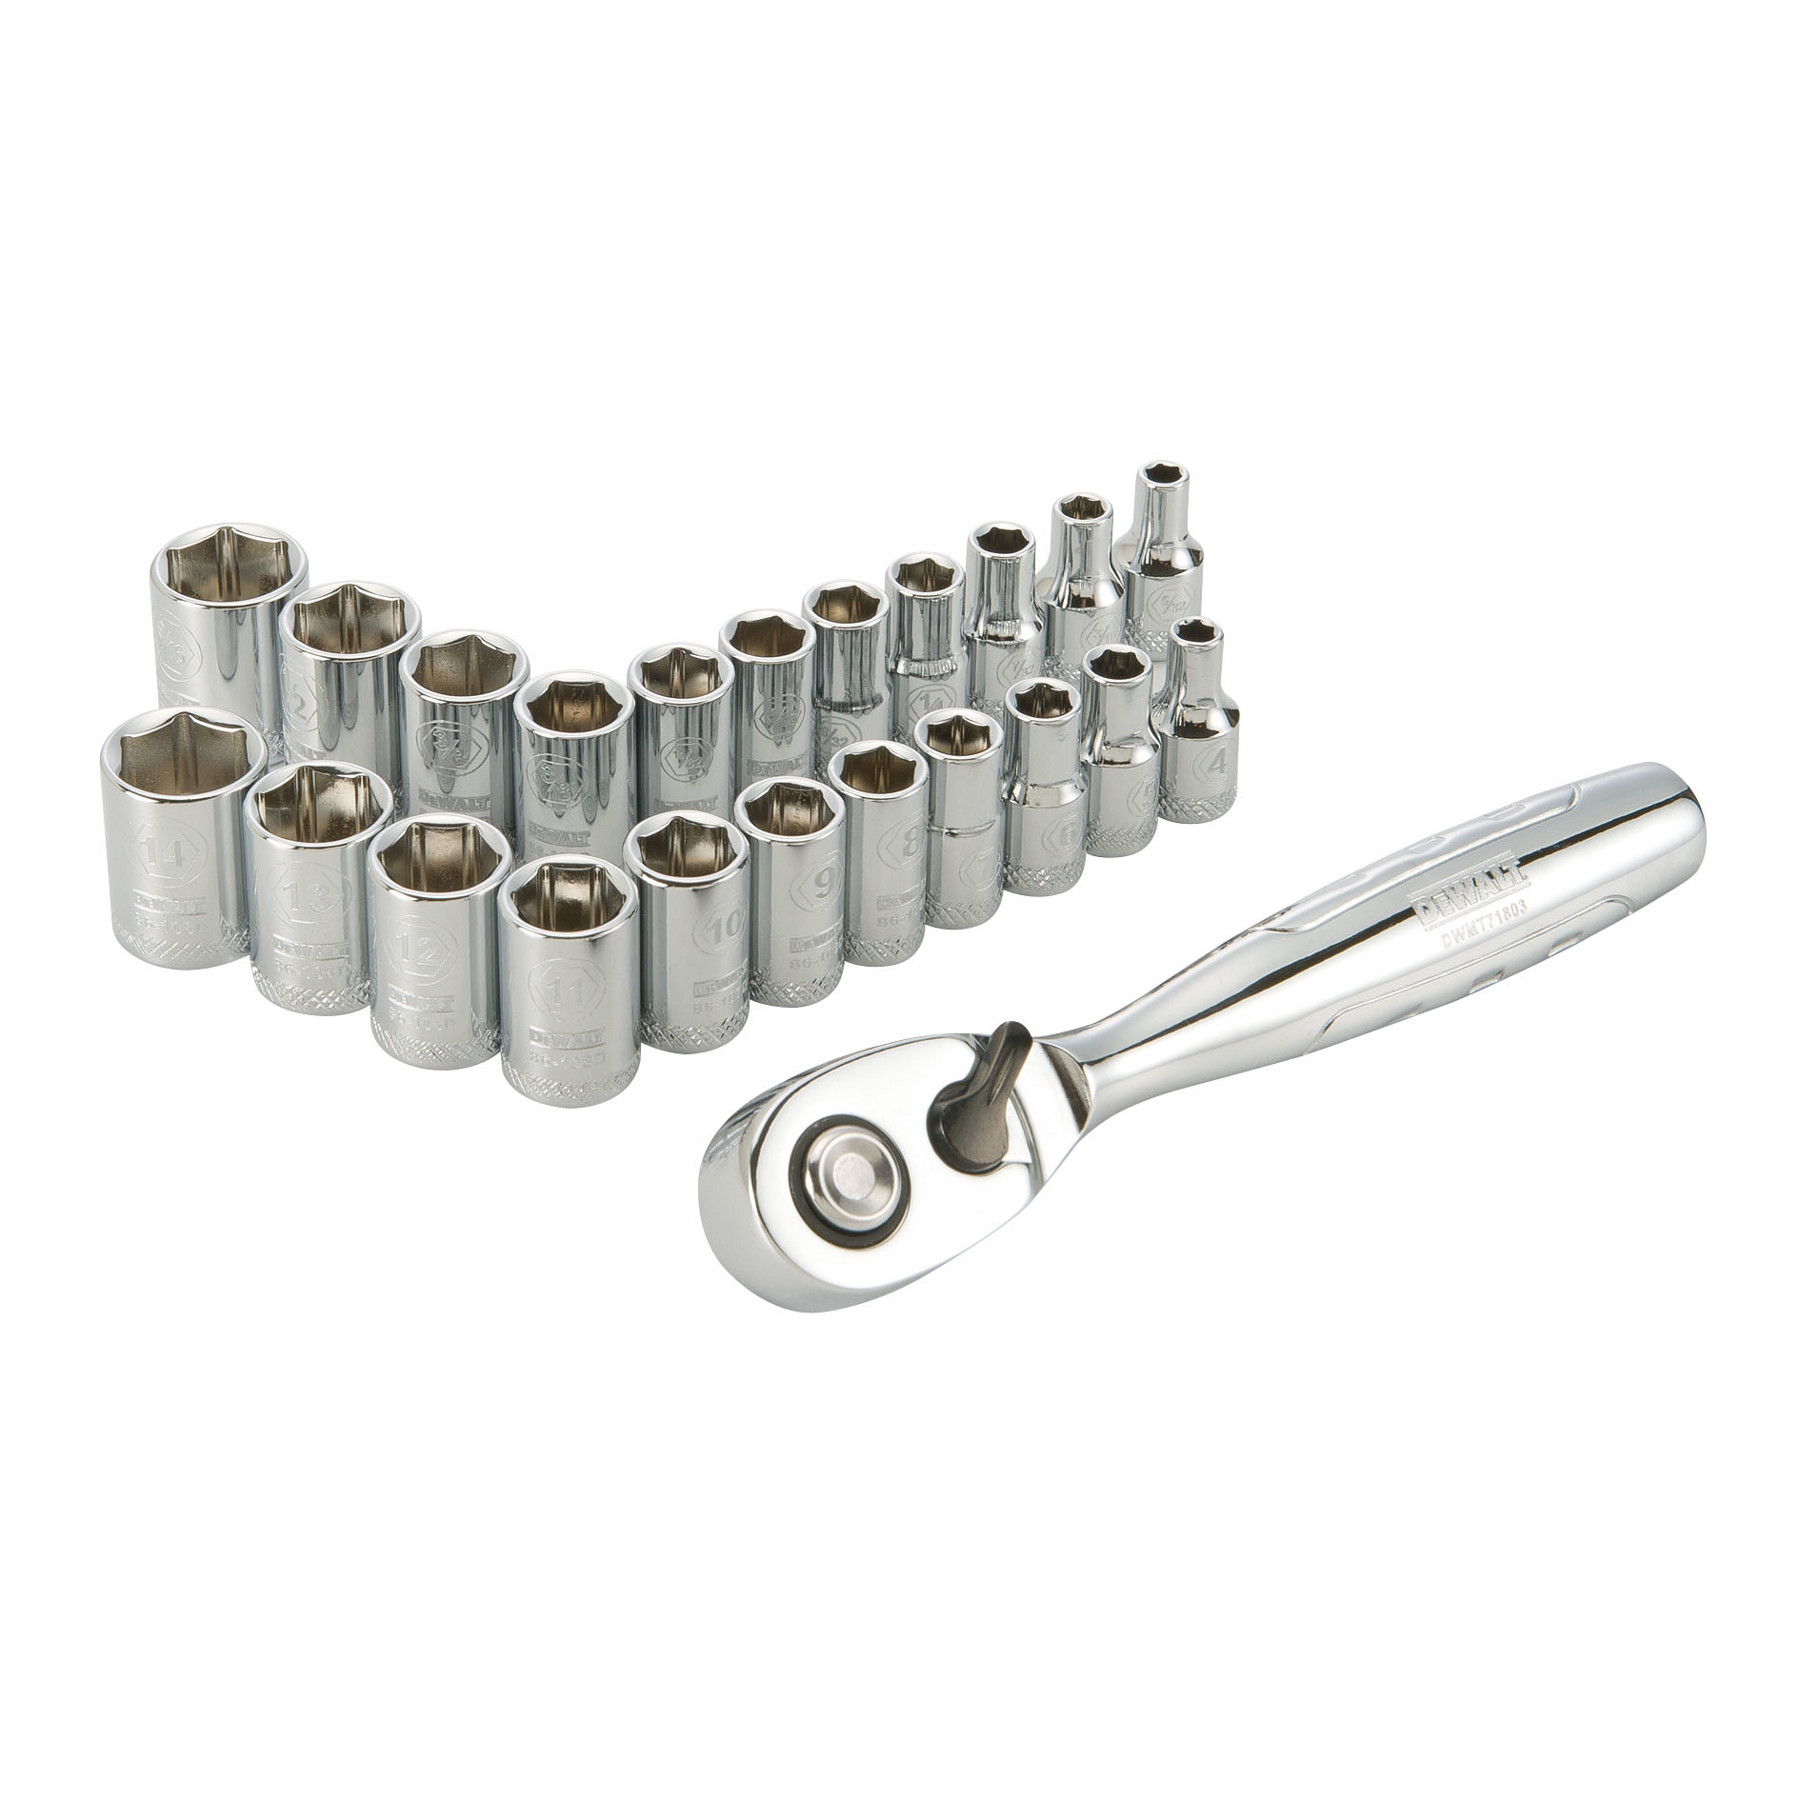 0076174721607 - 23 PIECE 1/4-INCH FULL POLISH SOCKET WRENCH SET WITH PEAR HEAD RATCHET